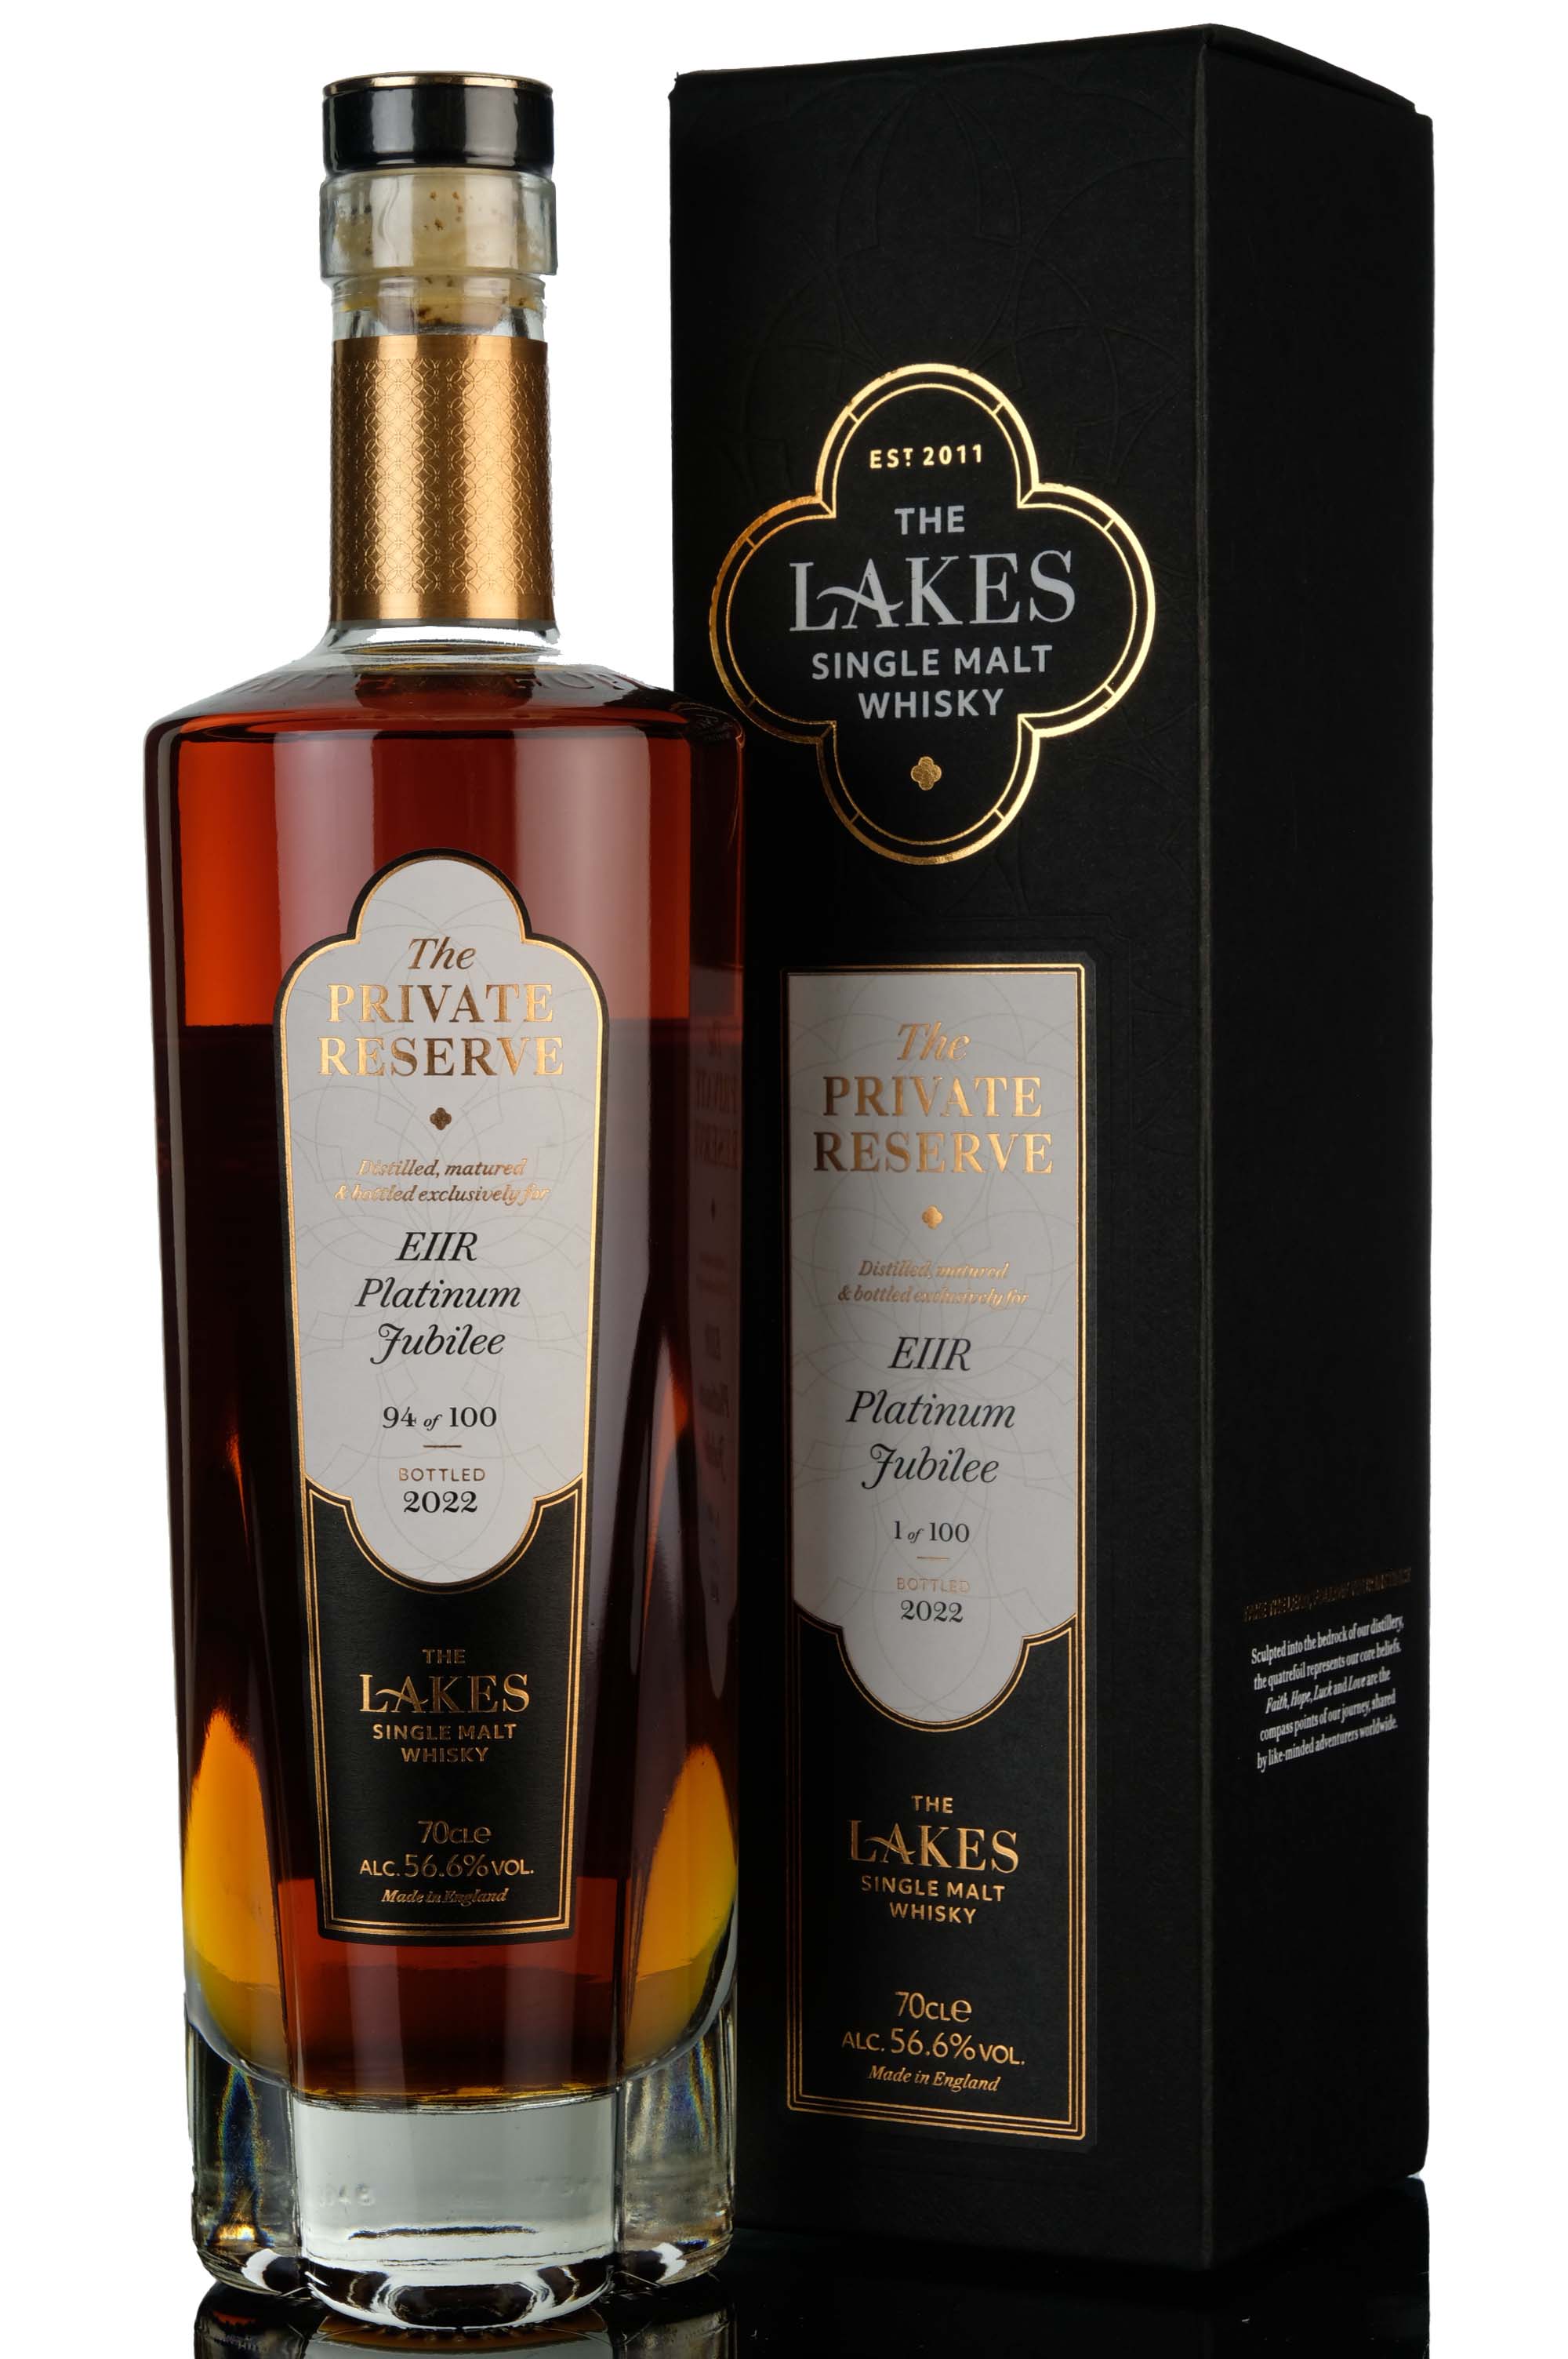 The Lakes Private Reserve - Exclusively For EIIR Platinum Jubilee - 2022 Release